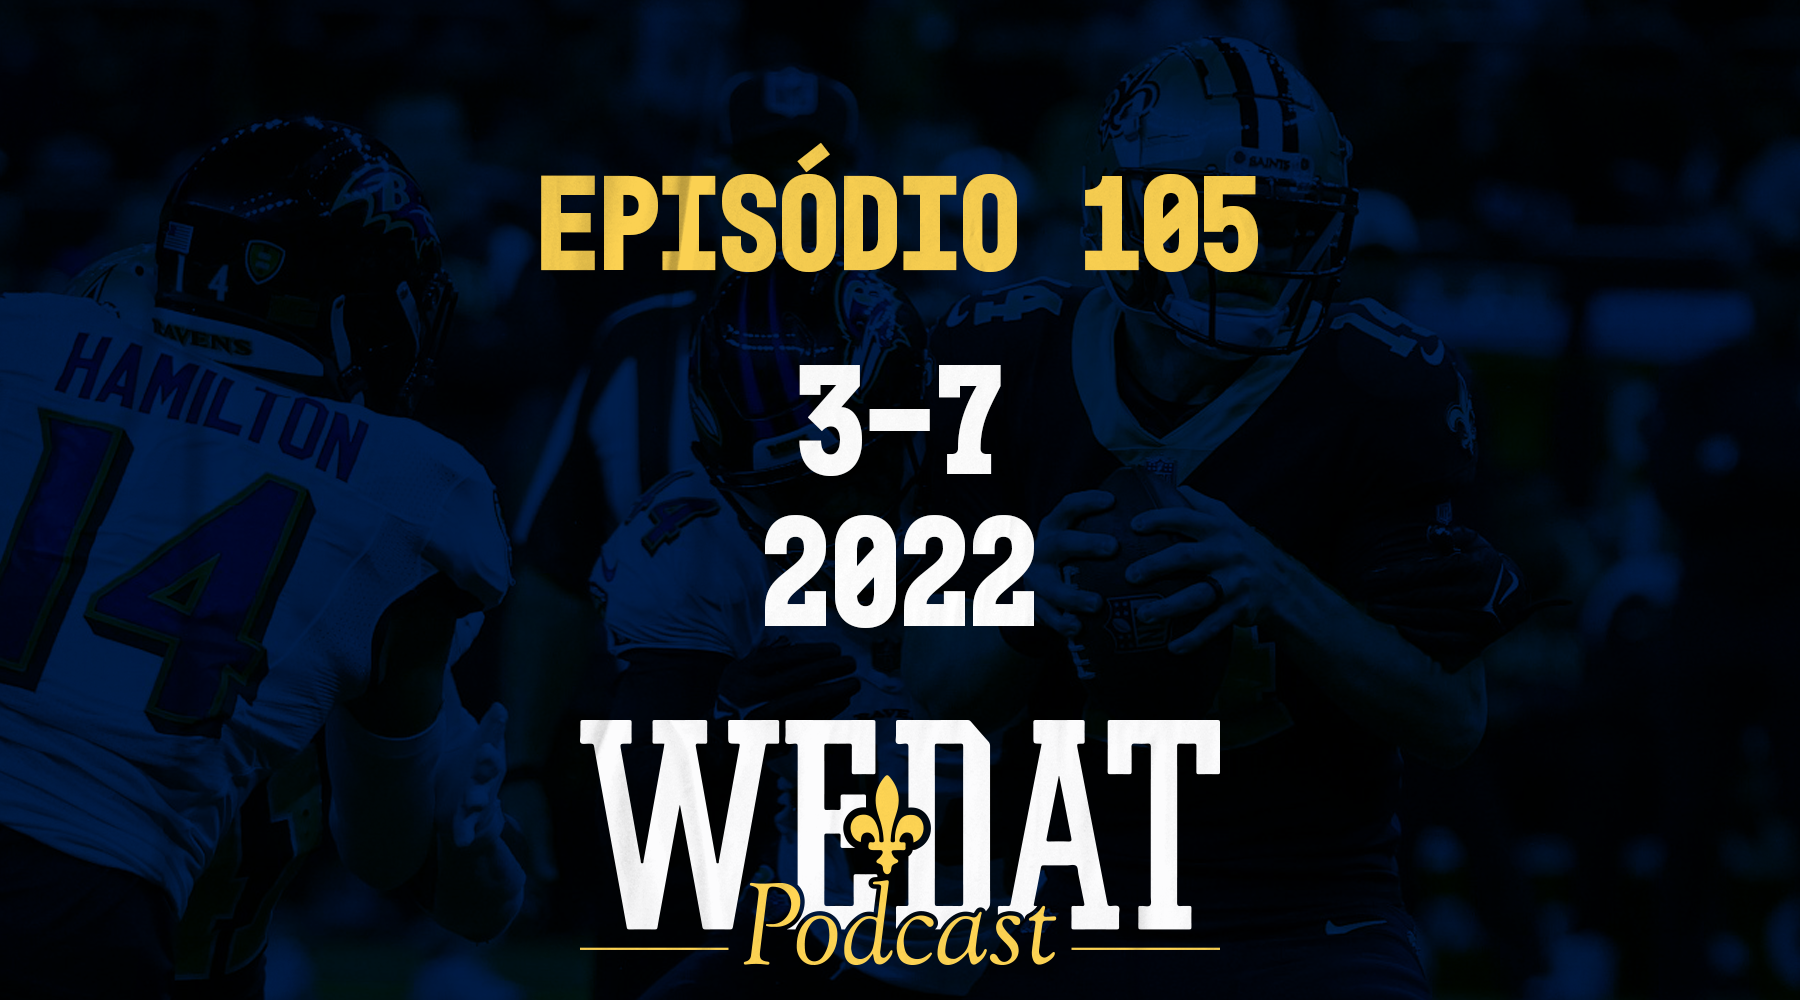 We Dat Podcast #105 – 3-7|2022